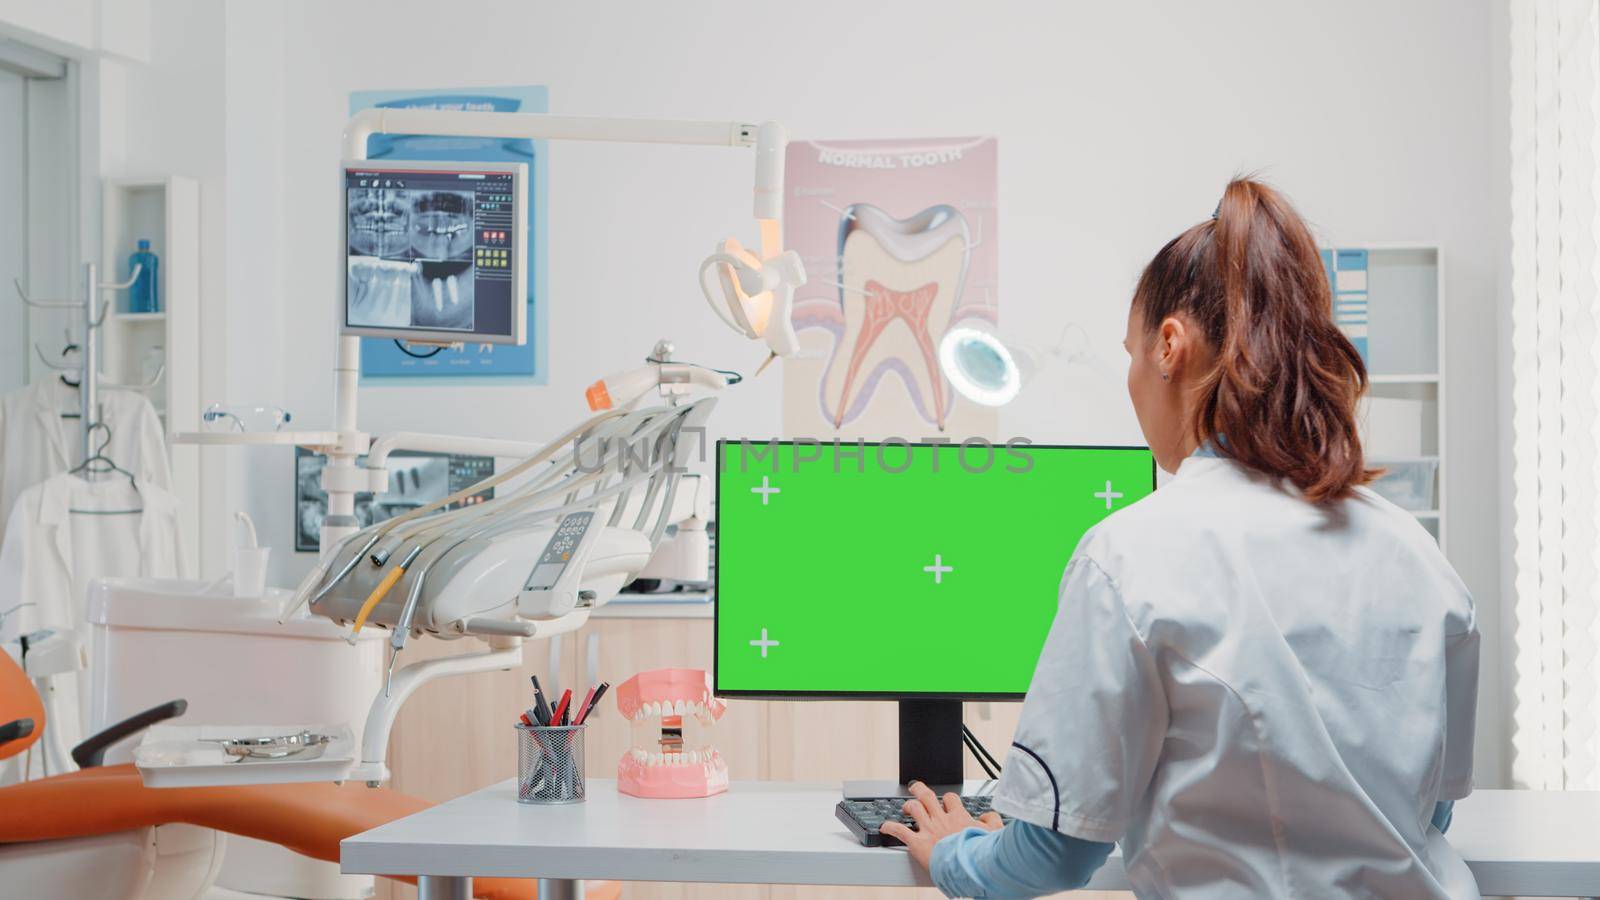 Dentist using computer with horizontal green screen on display by DCStudio